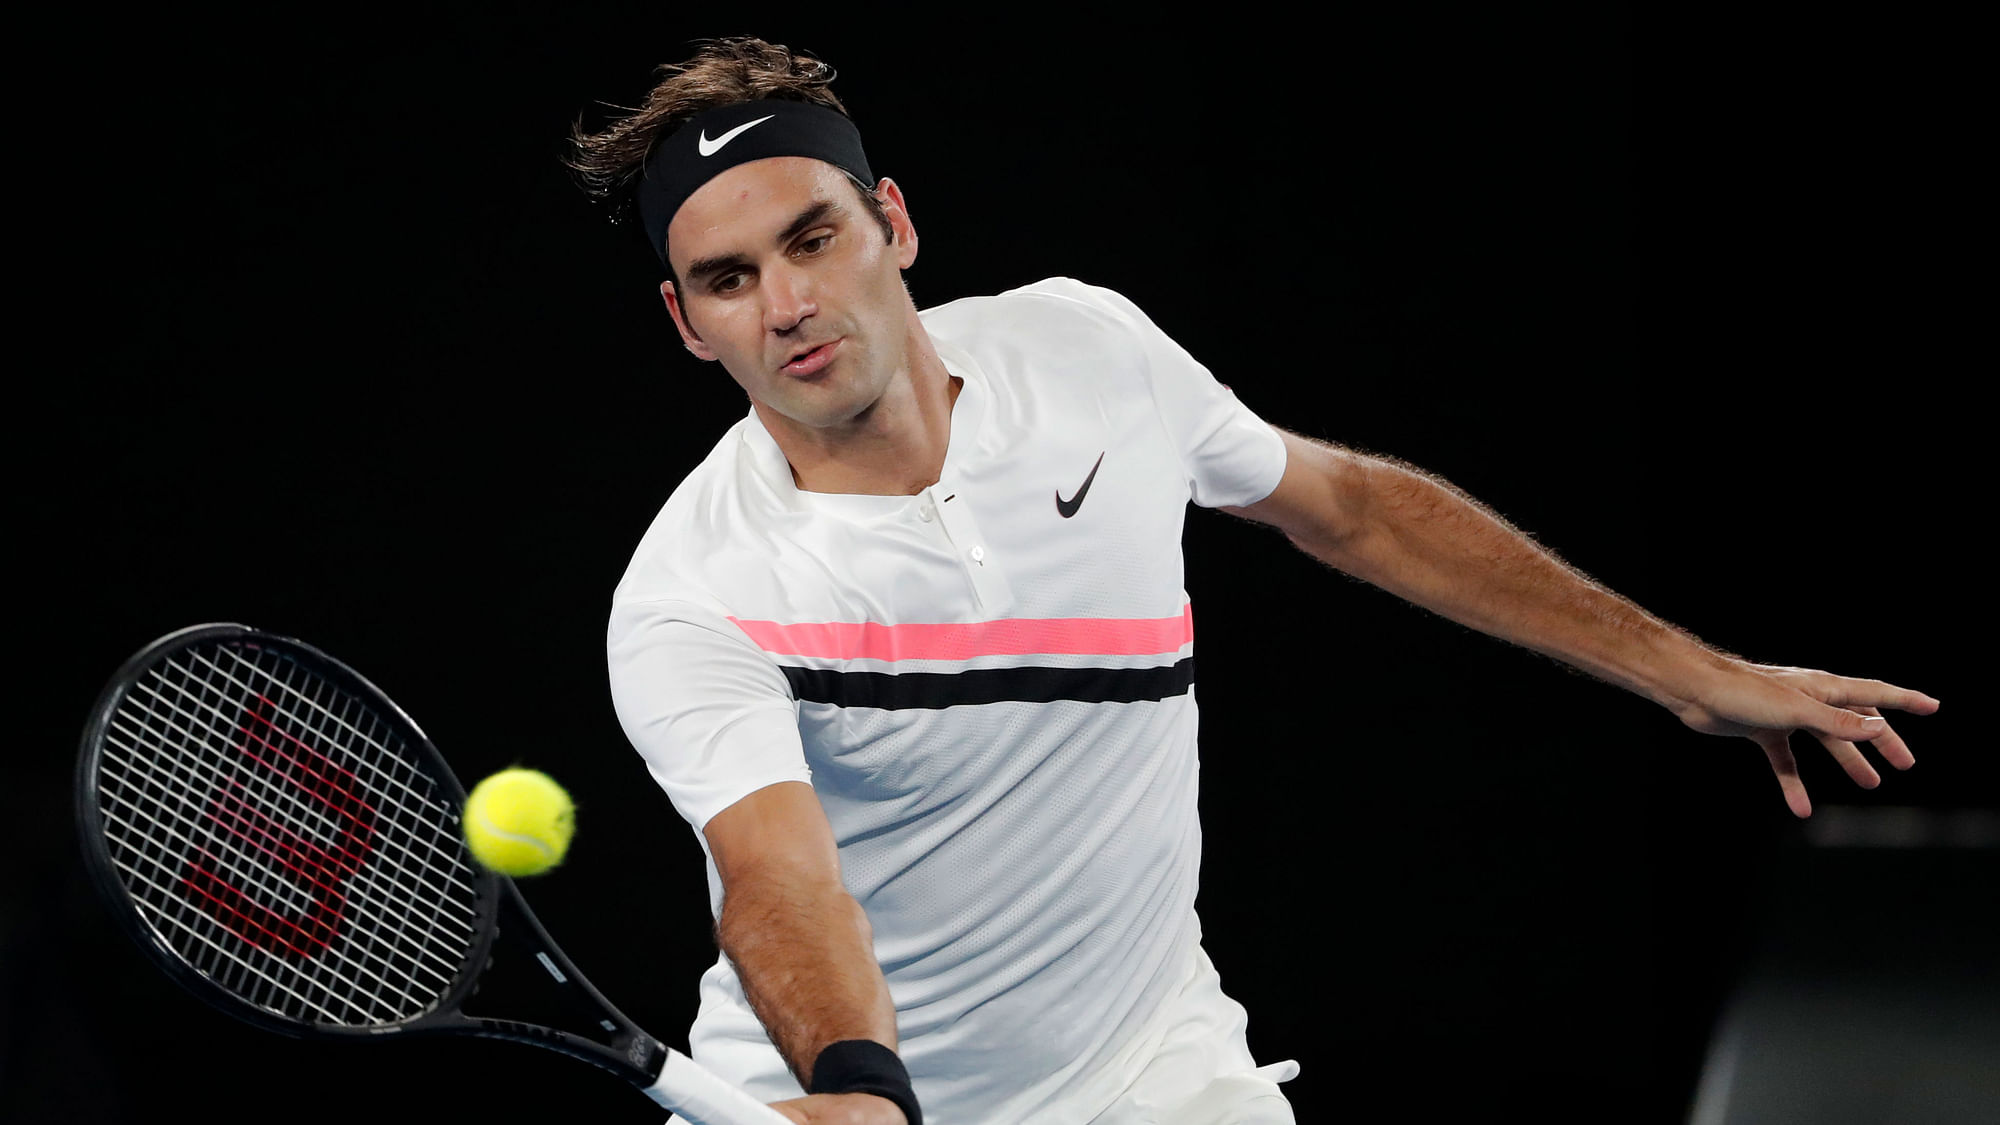 Switzerland’s Roger Federer makes a forehand return to France’s Richard Gasquet during their third round match.